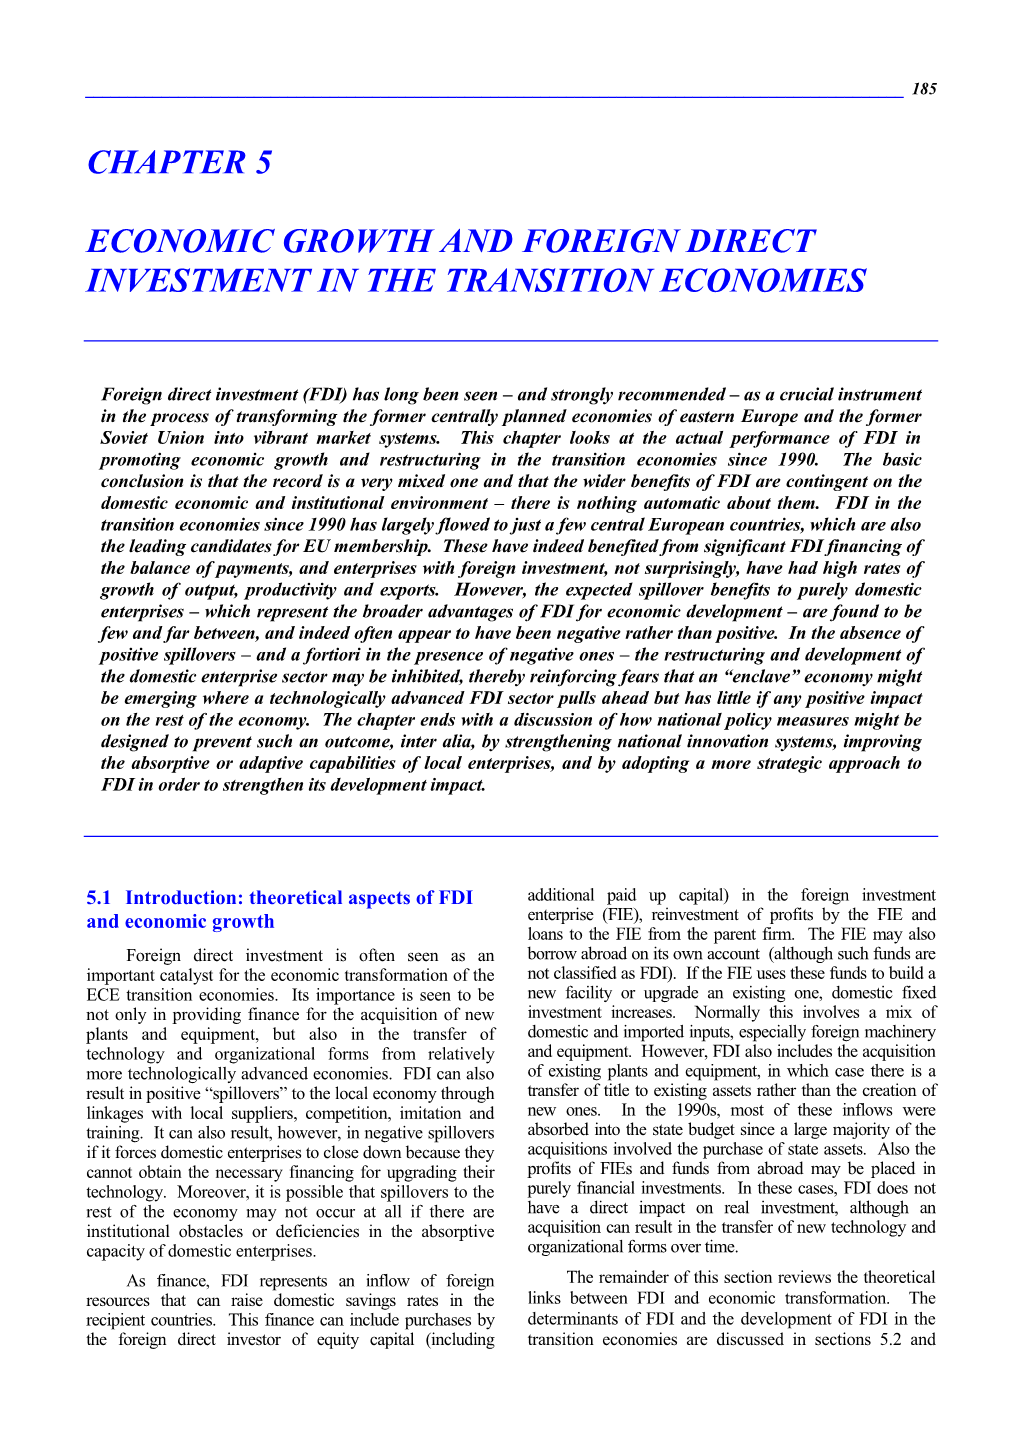 Chapter 5 Economic Growth and Foreign Direct